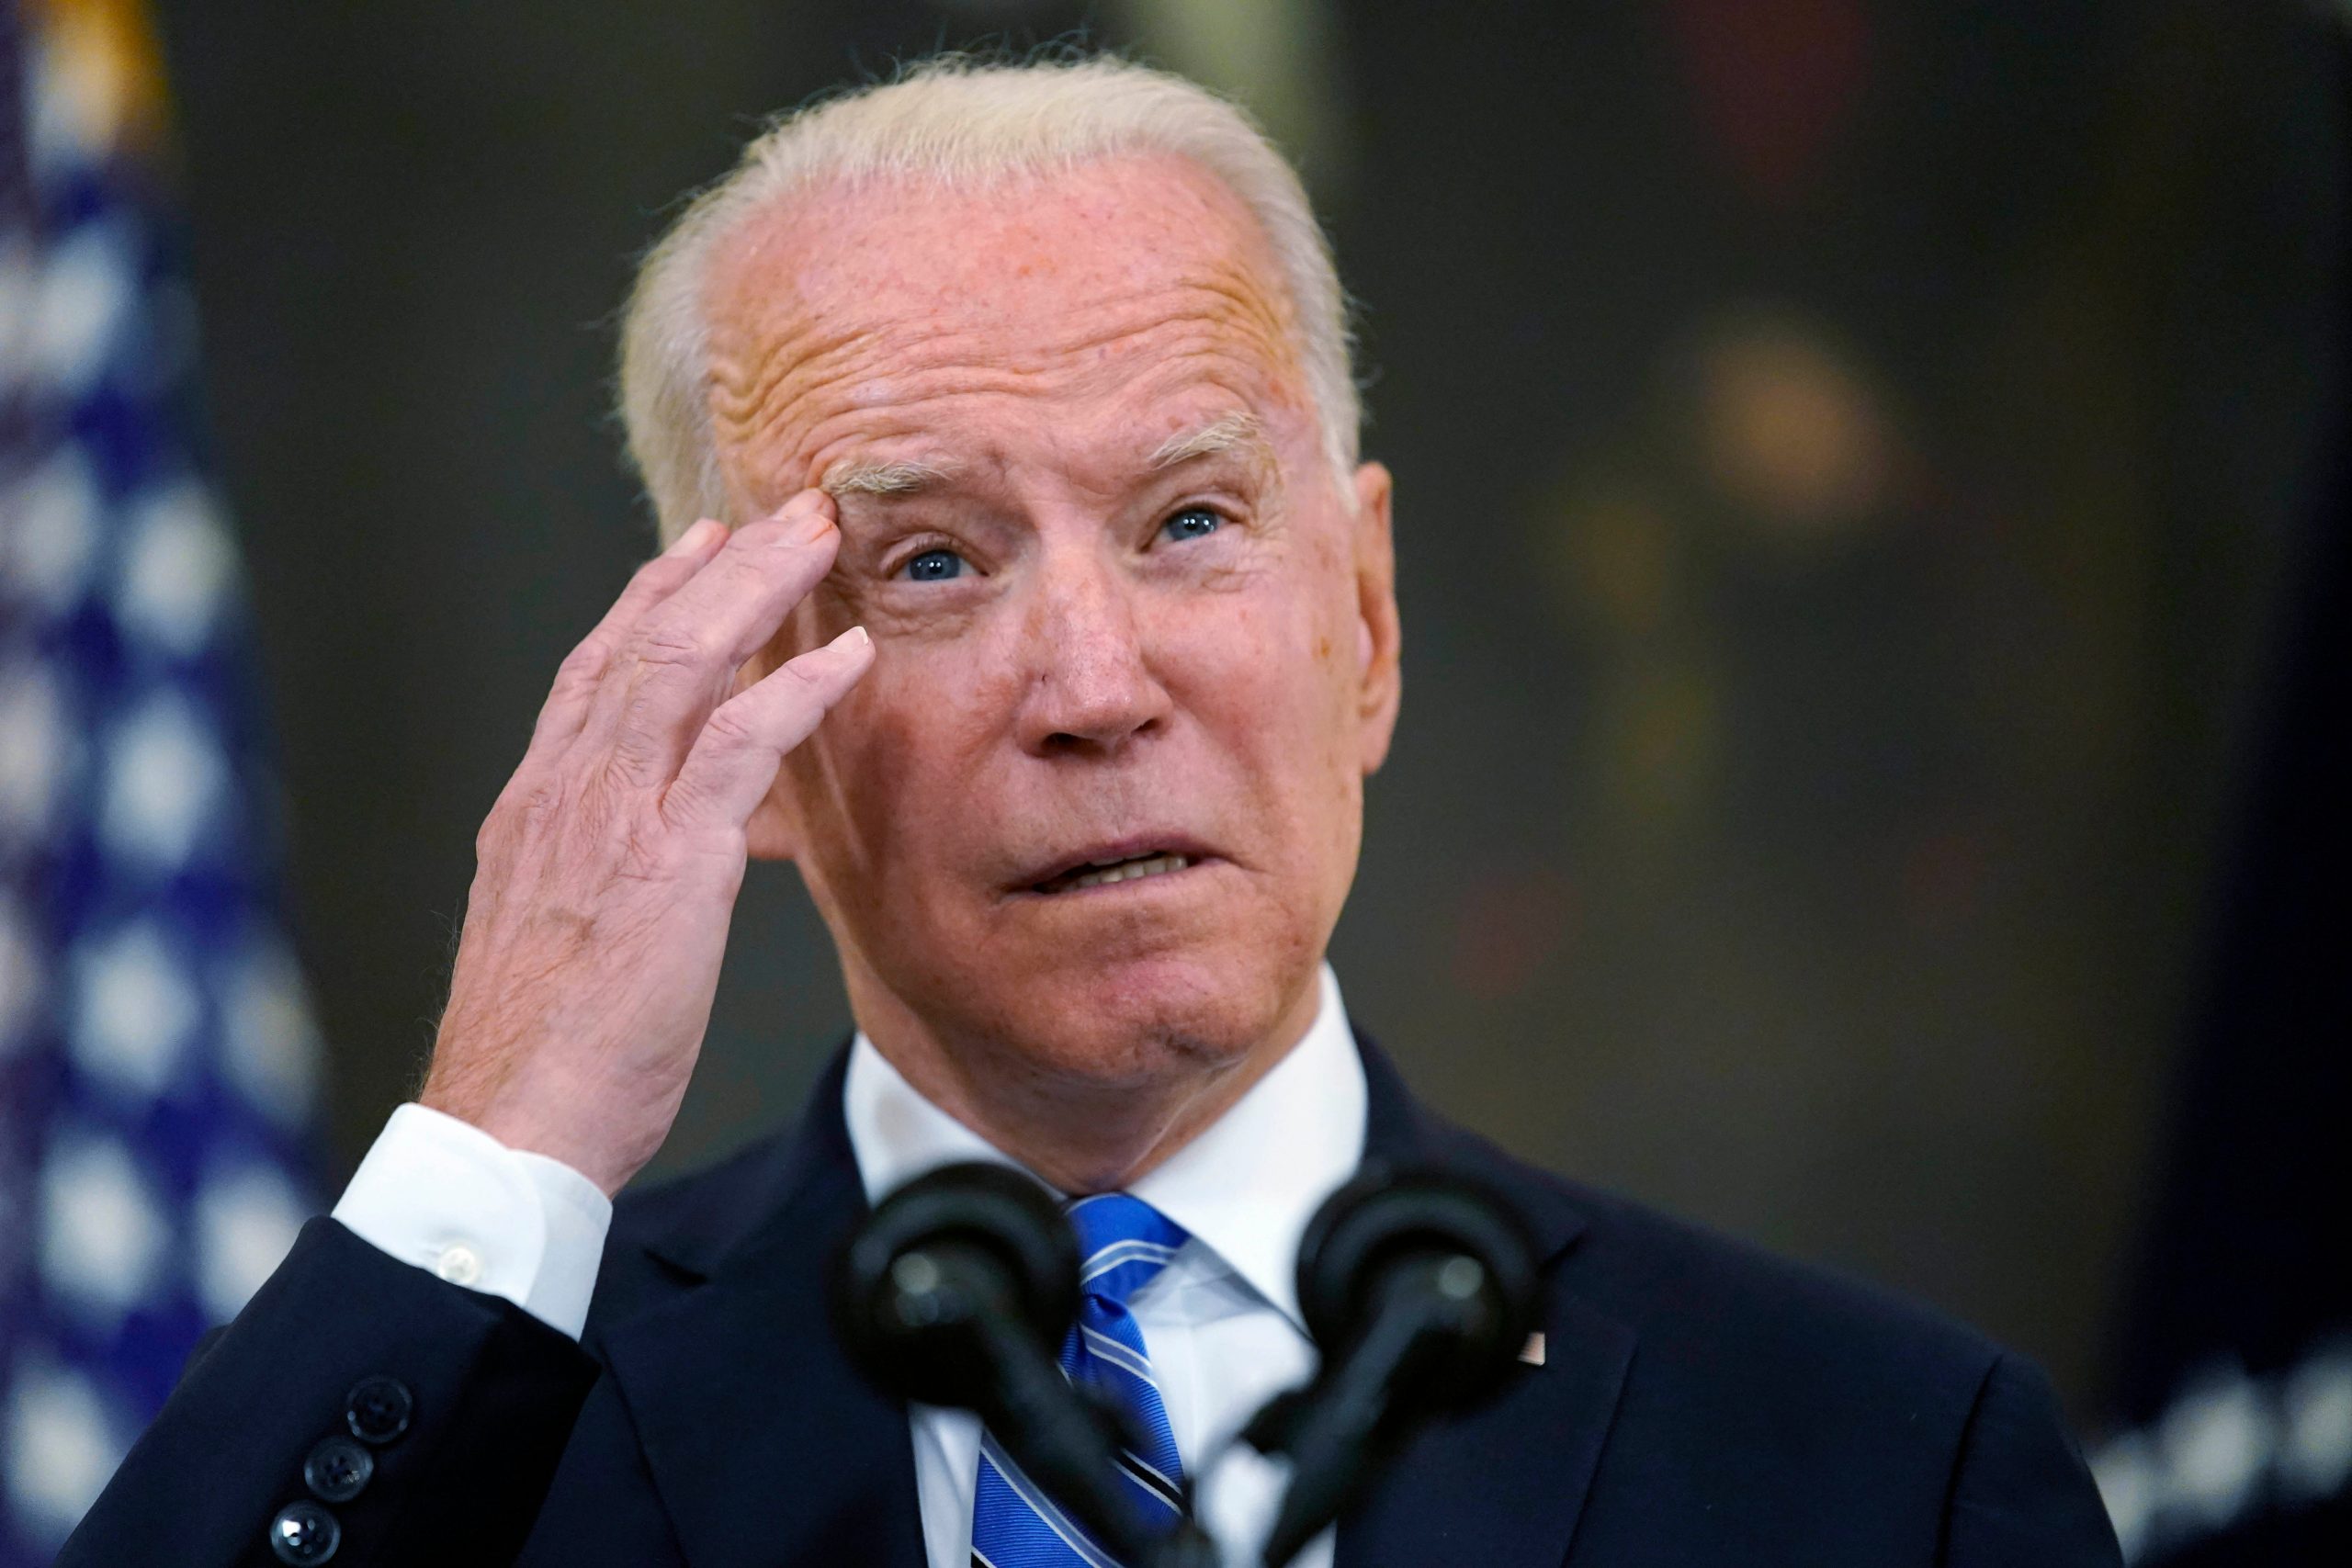 Chaos was unavoidable, says Joe Biden on US exit from Afghanistan